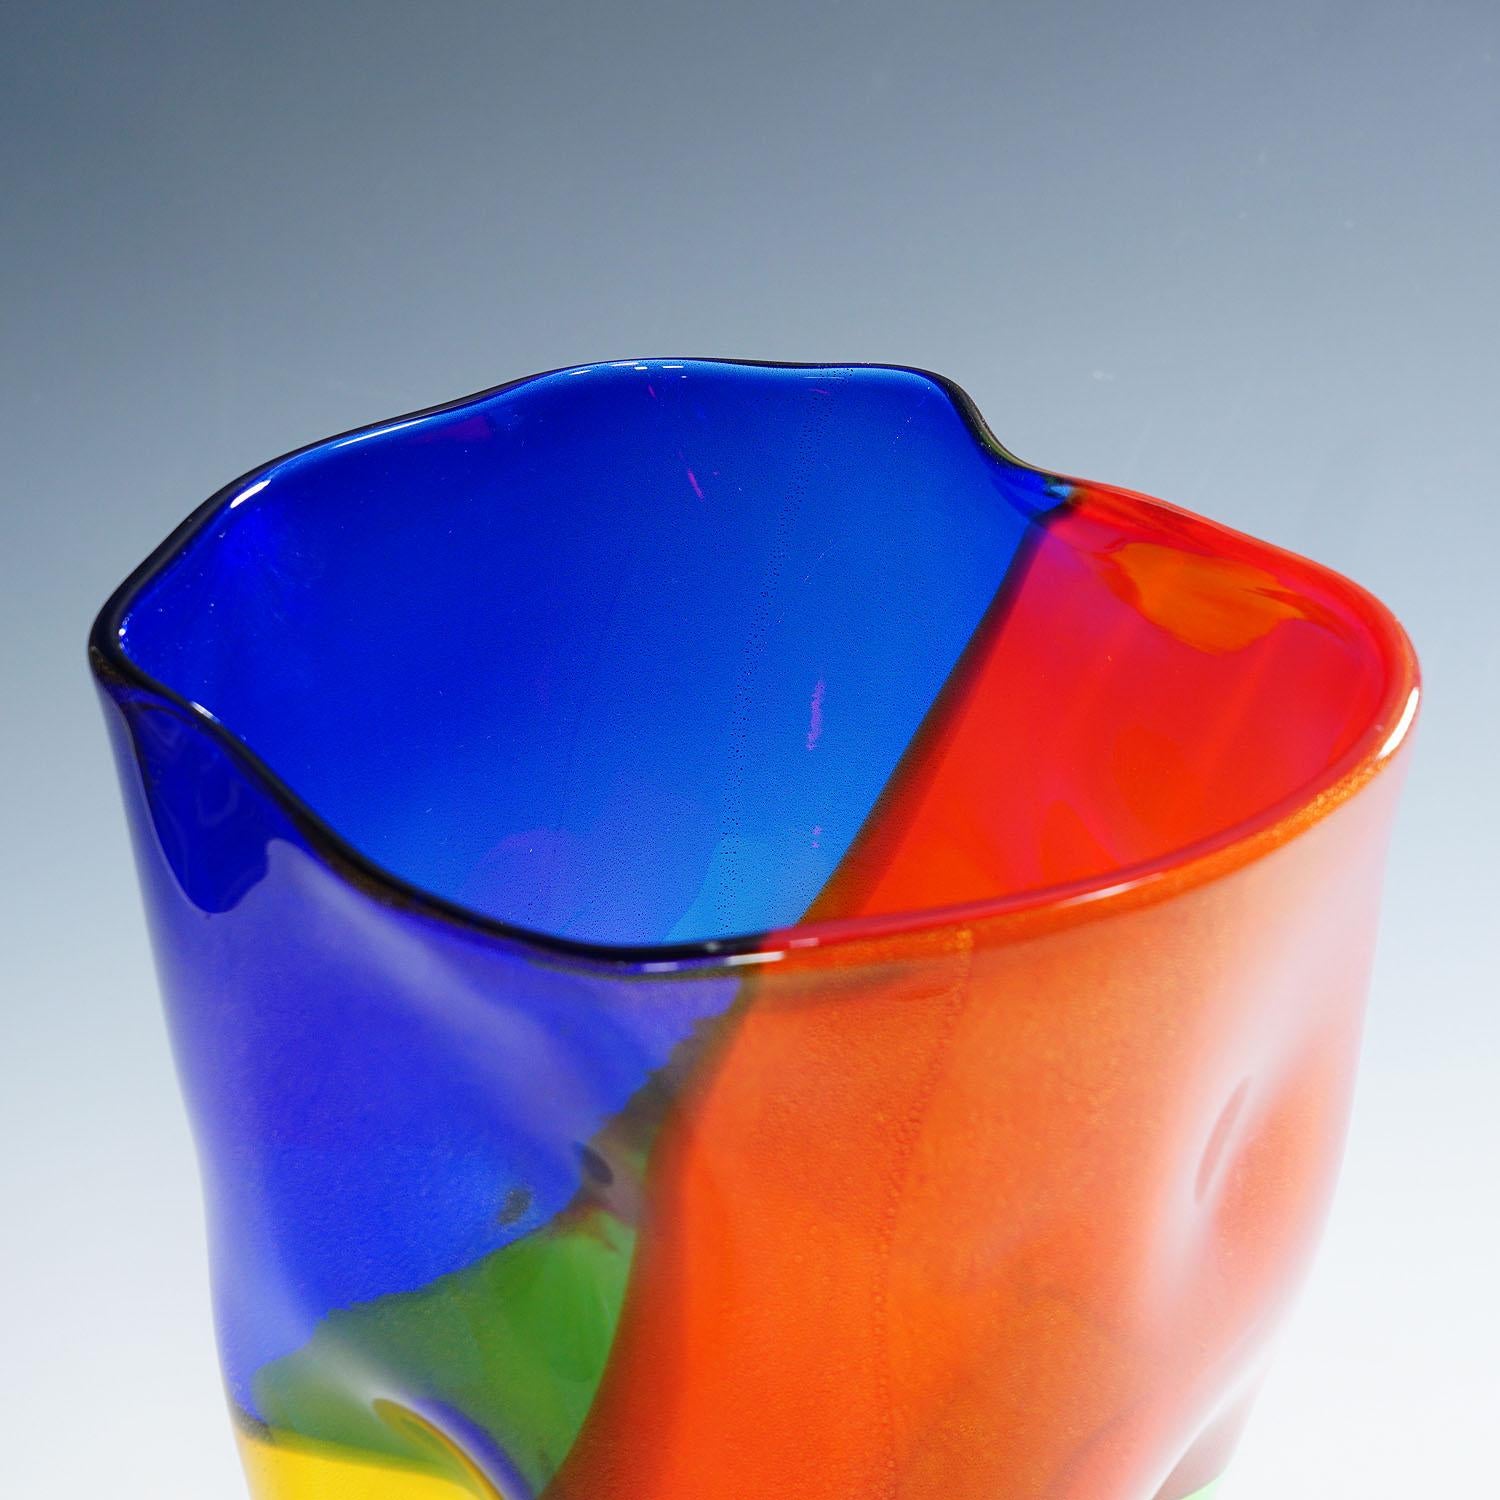 Vintage Art Glass Vase of the 4 Quarti Series by Seguso Viro In Good Condition For Sale In Berghuelen, DE